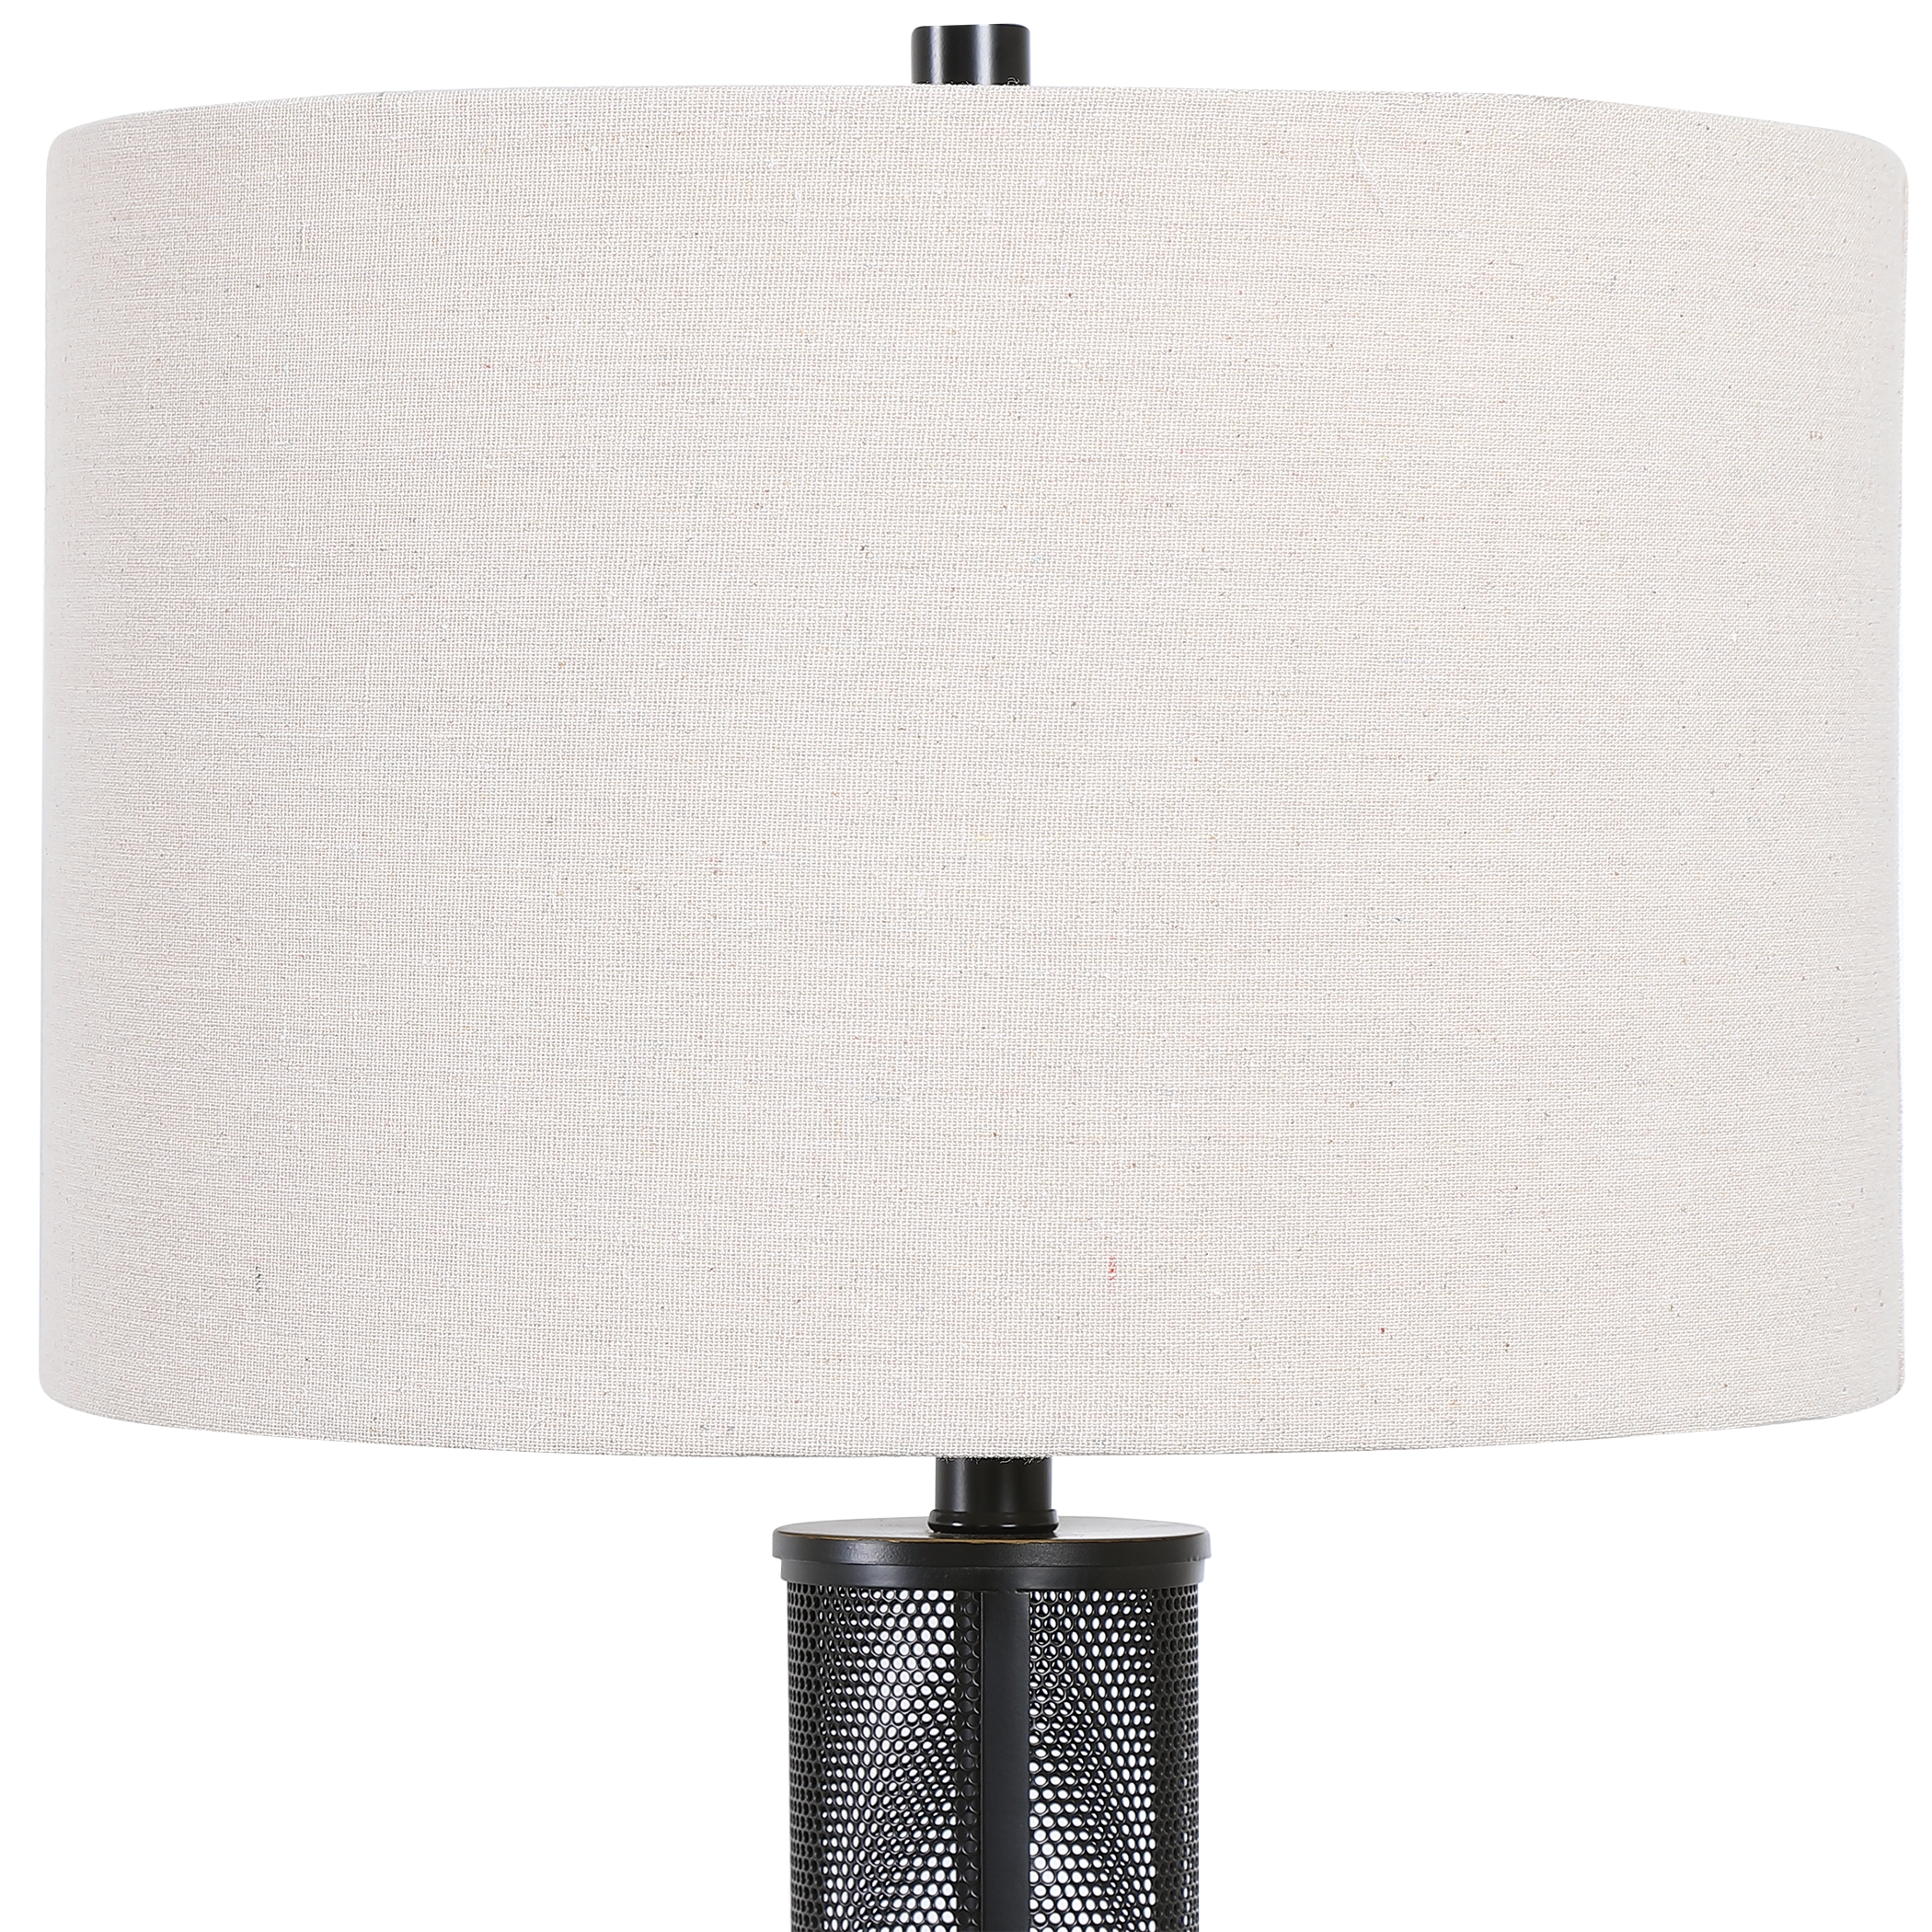 TABLE LAMP - Image 3